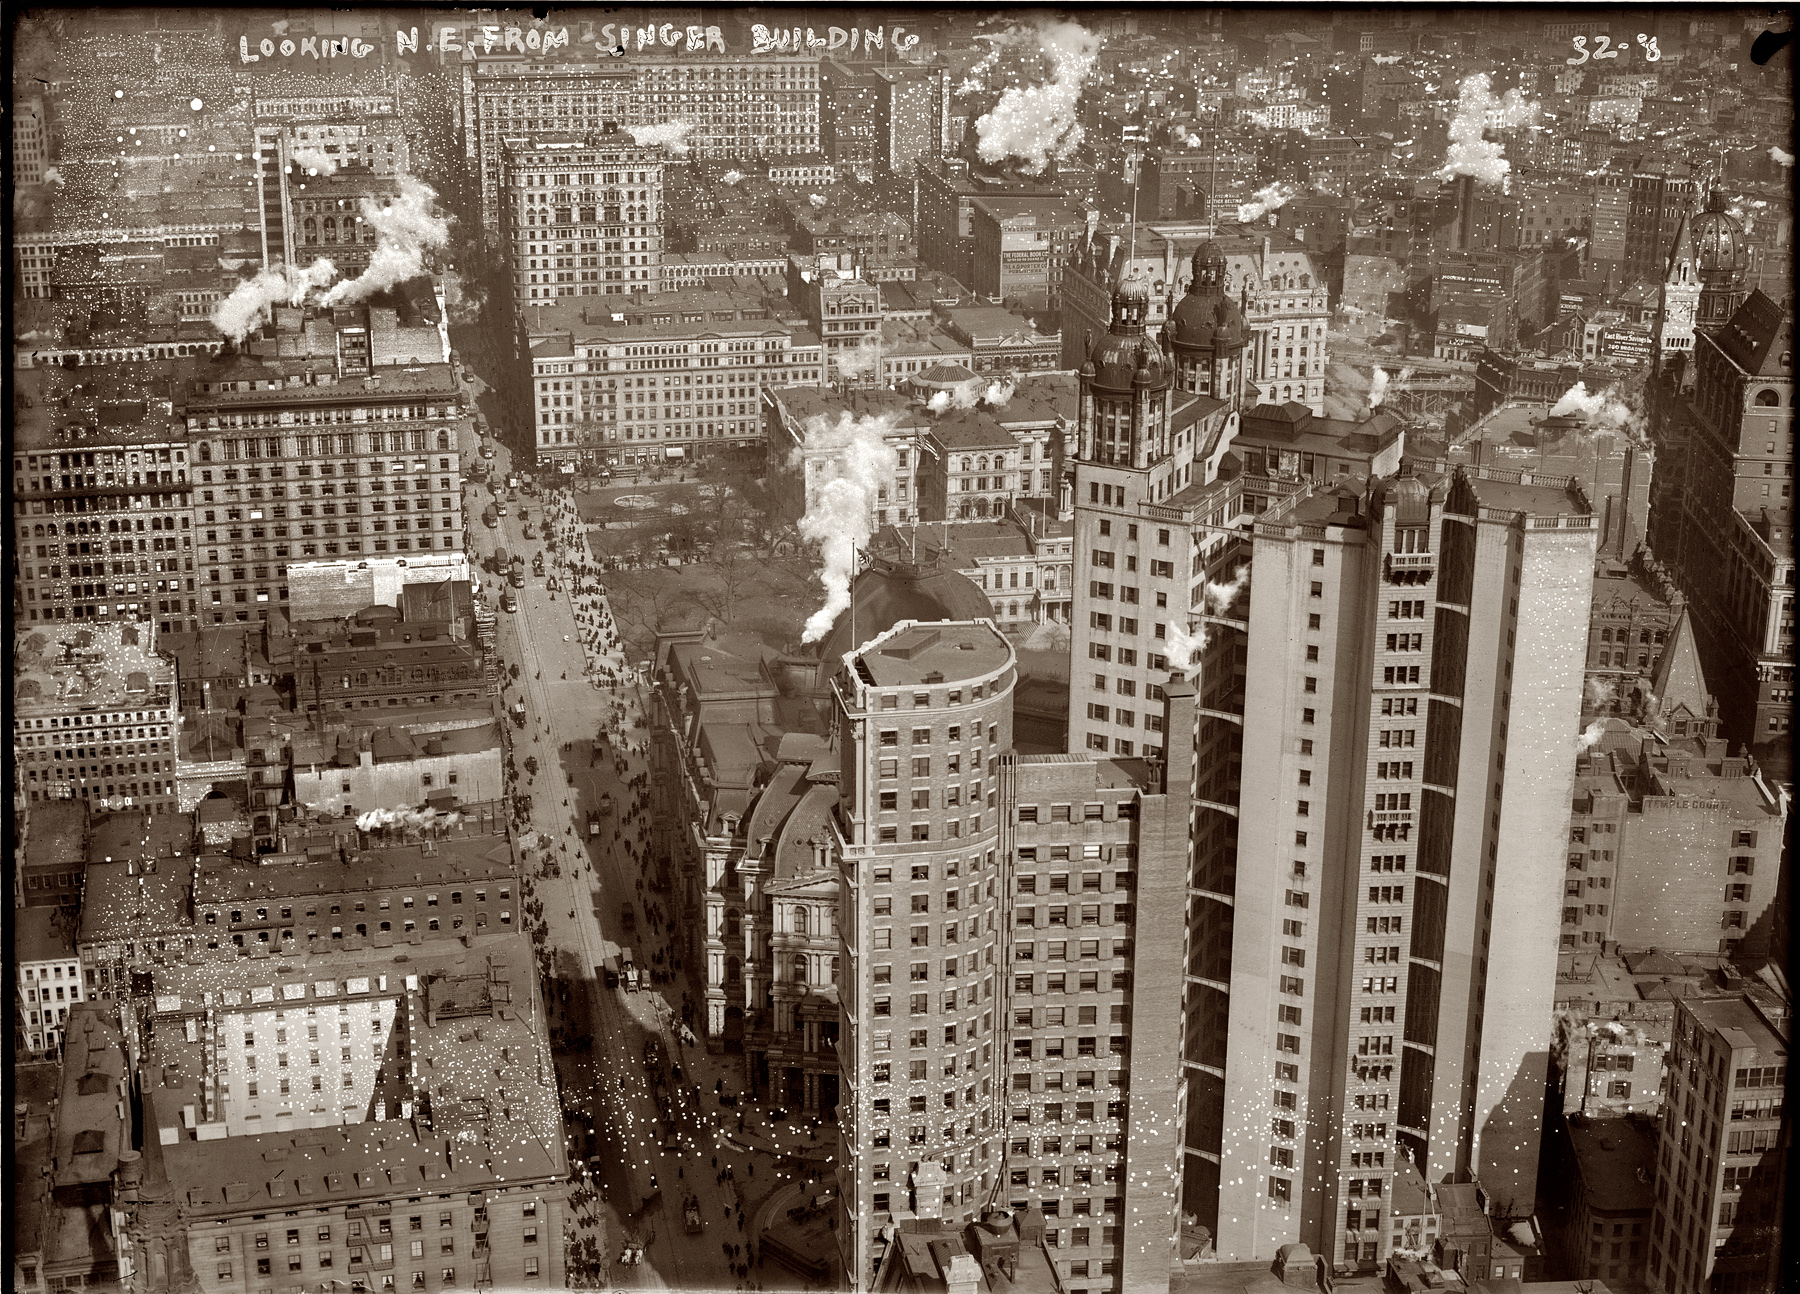 Manhattan, looking northeast from atop the Singer Building in 1908. 5x7 glass negative, George Grantham Bain Collection. View full size.